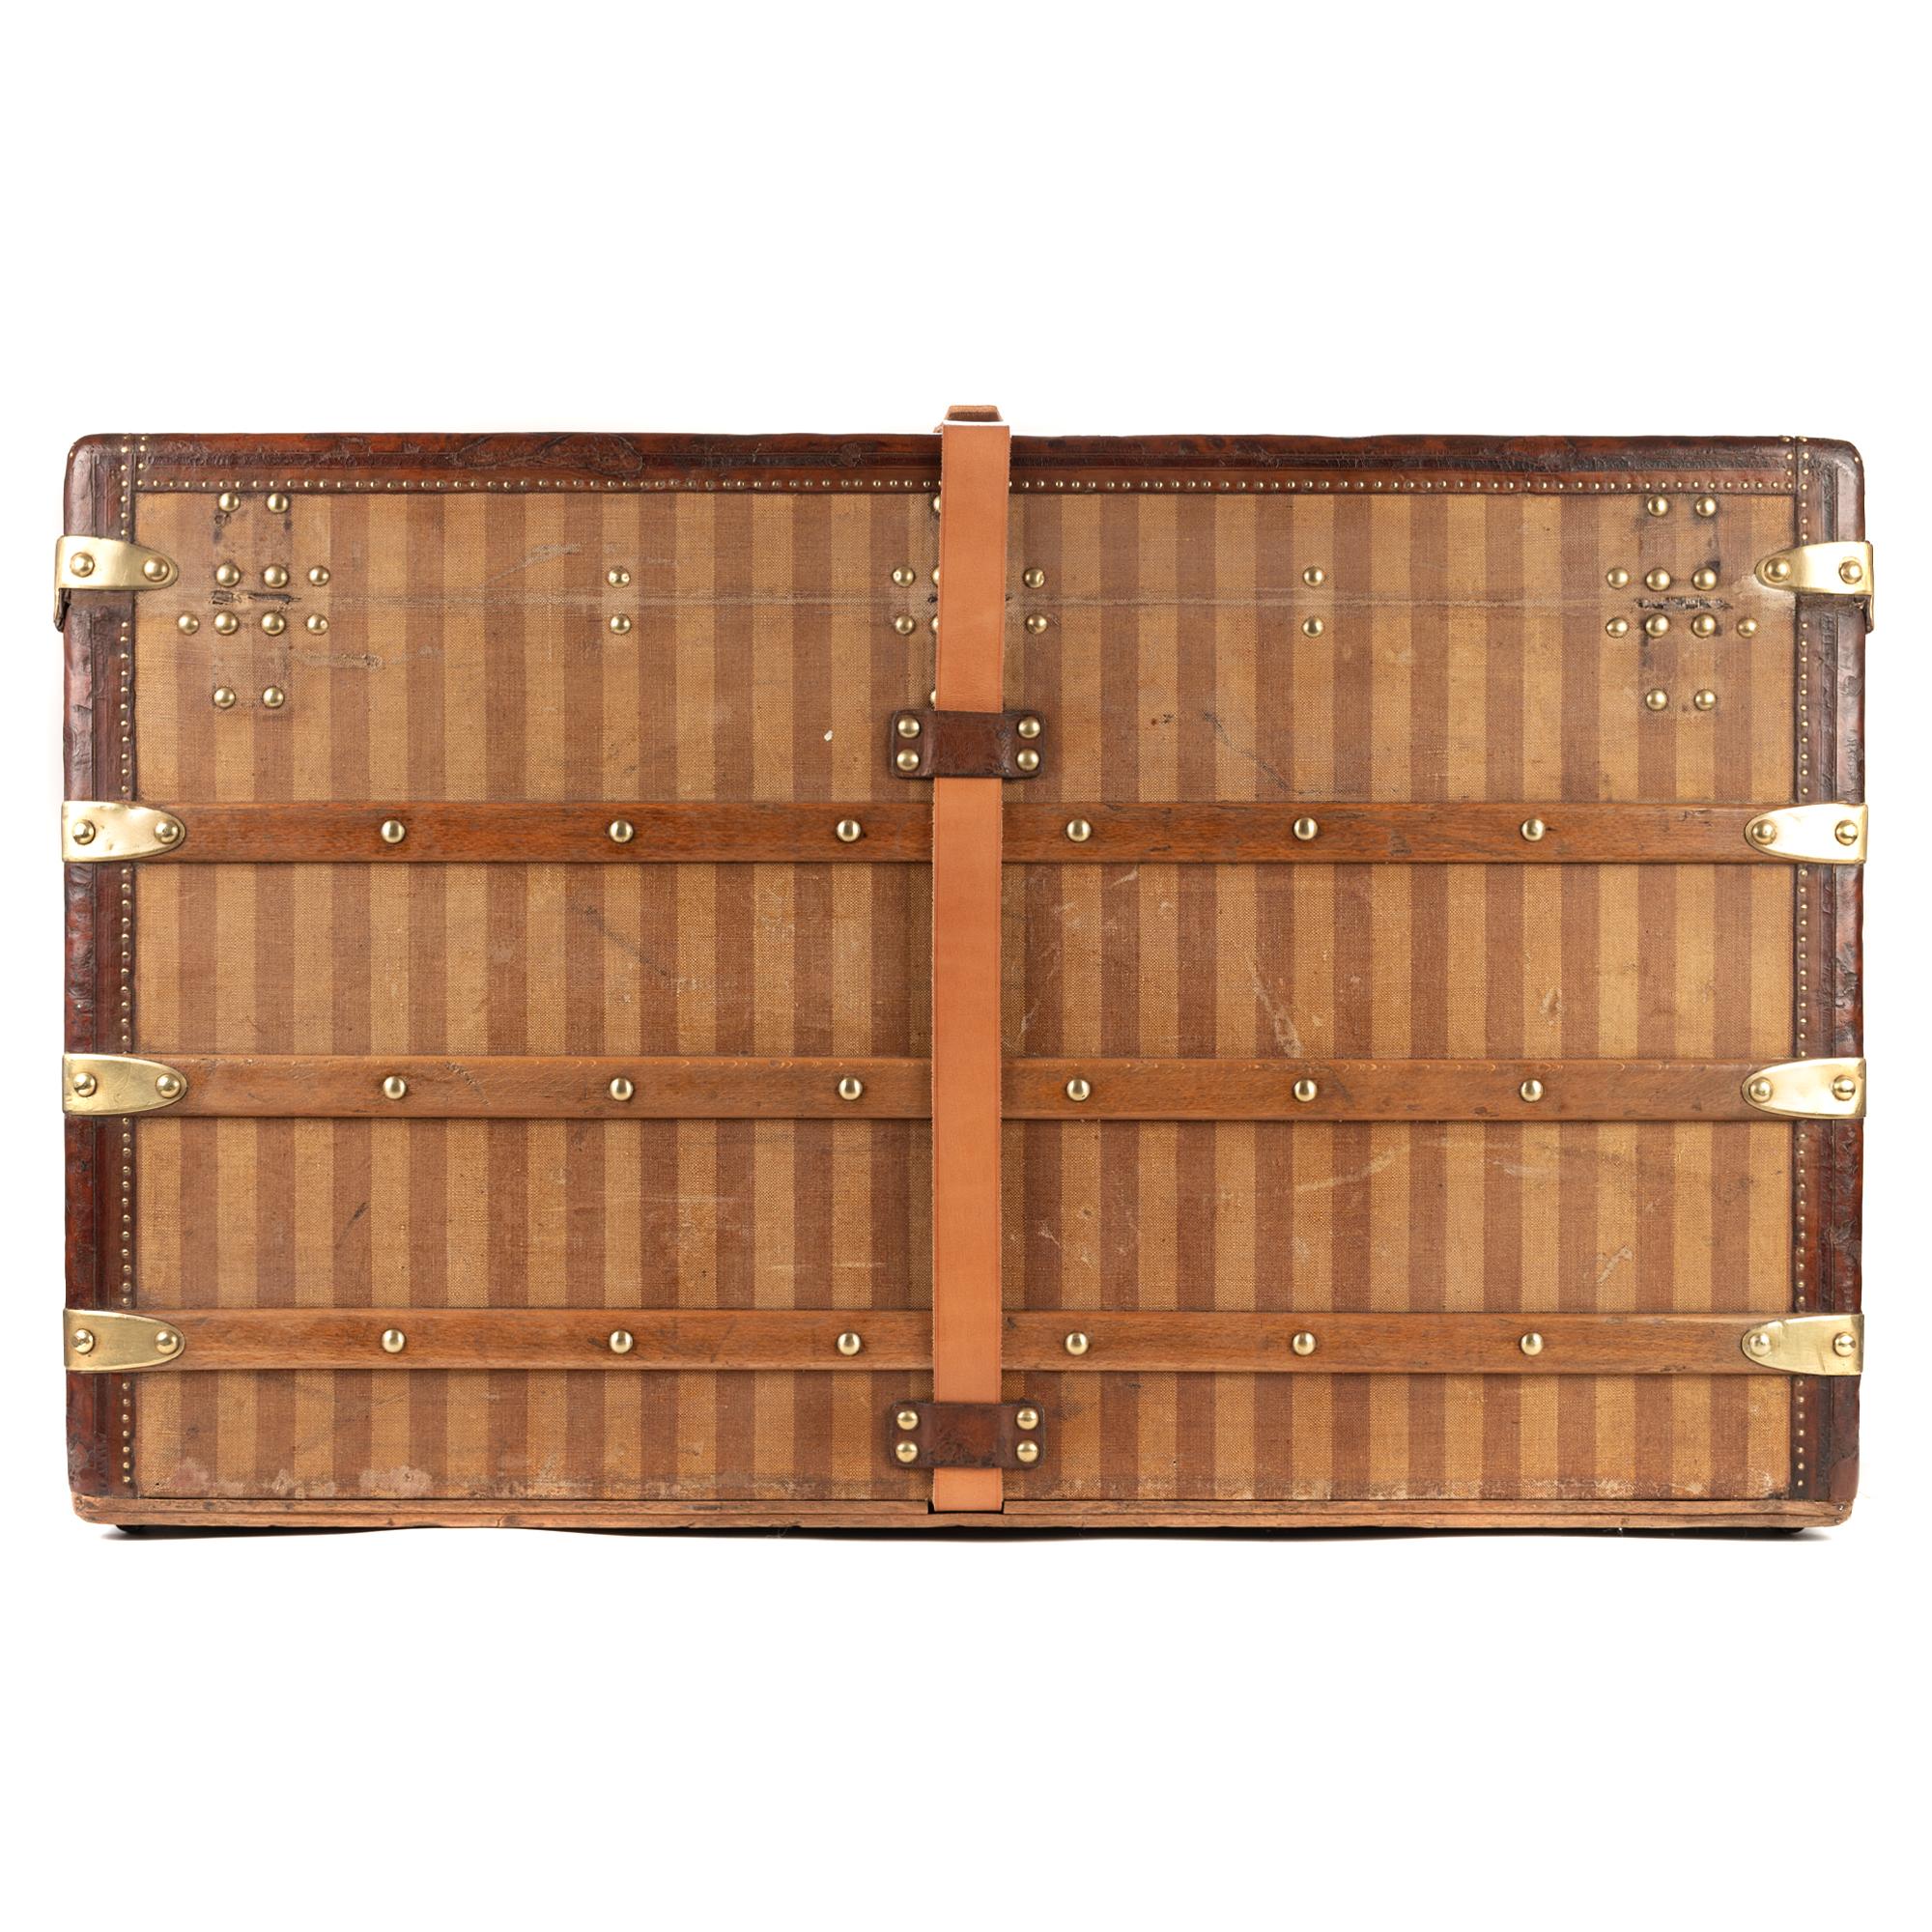 LOUIS VUITTON, Paris-London
Wooden box upholstered with stripes.
Carries inside a trunk-shaped label of the house marked LOUIS VITTON 289 Oxford Street, Regent Circus, London, rue Scribe in Paris, numbered 12475 and carries a stamp of the house in